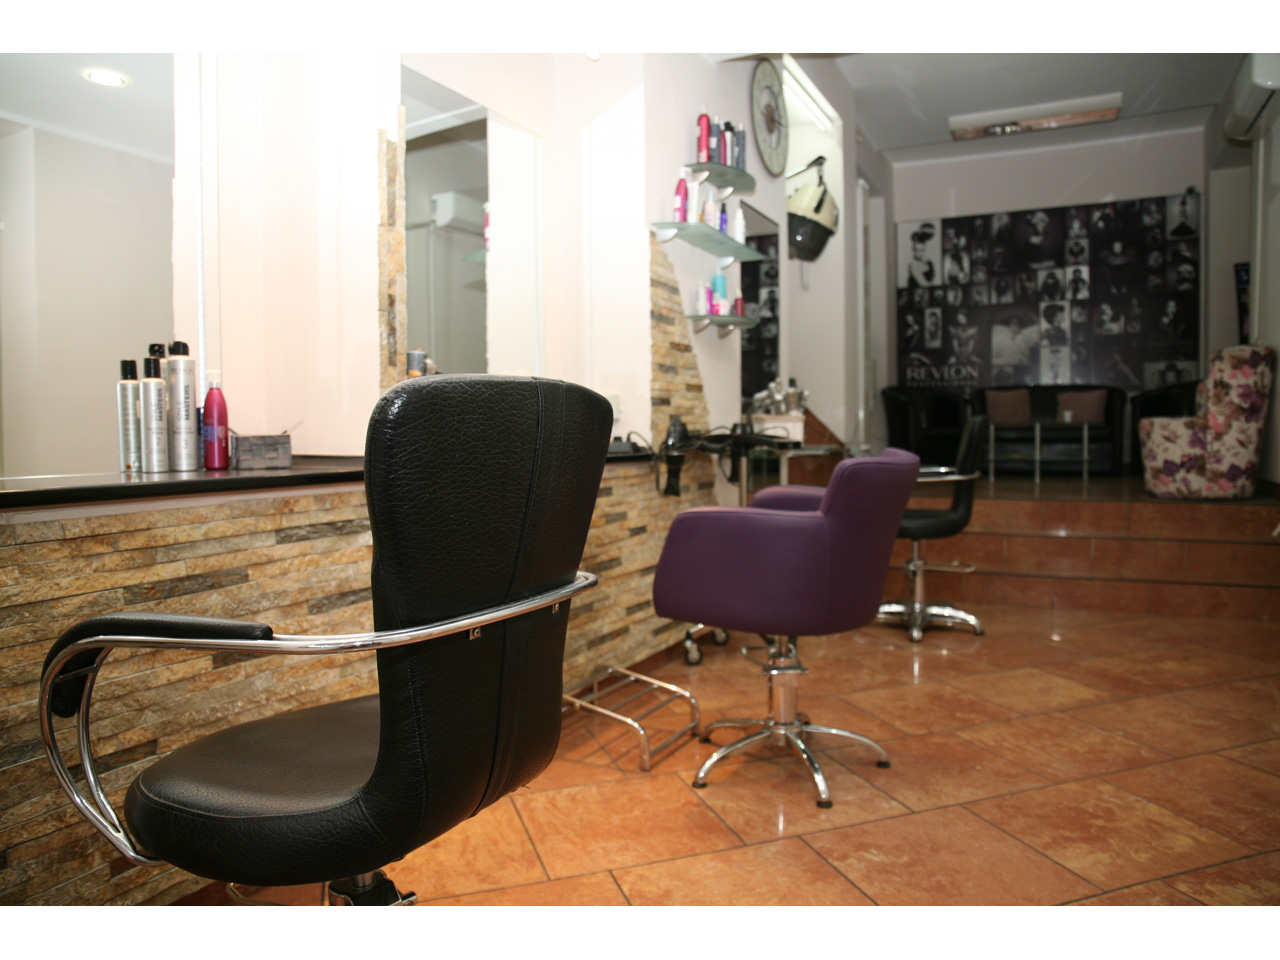 BUBI T - COSMETIC AND HAIRDRESSING SALON Beauty salons Belgrade - Photo 5